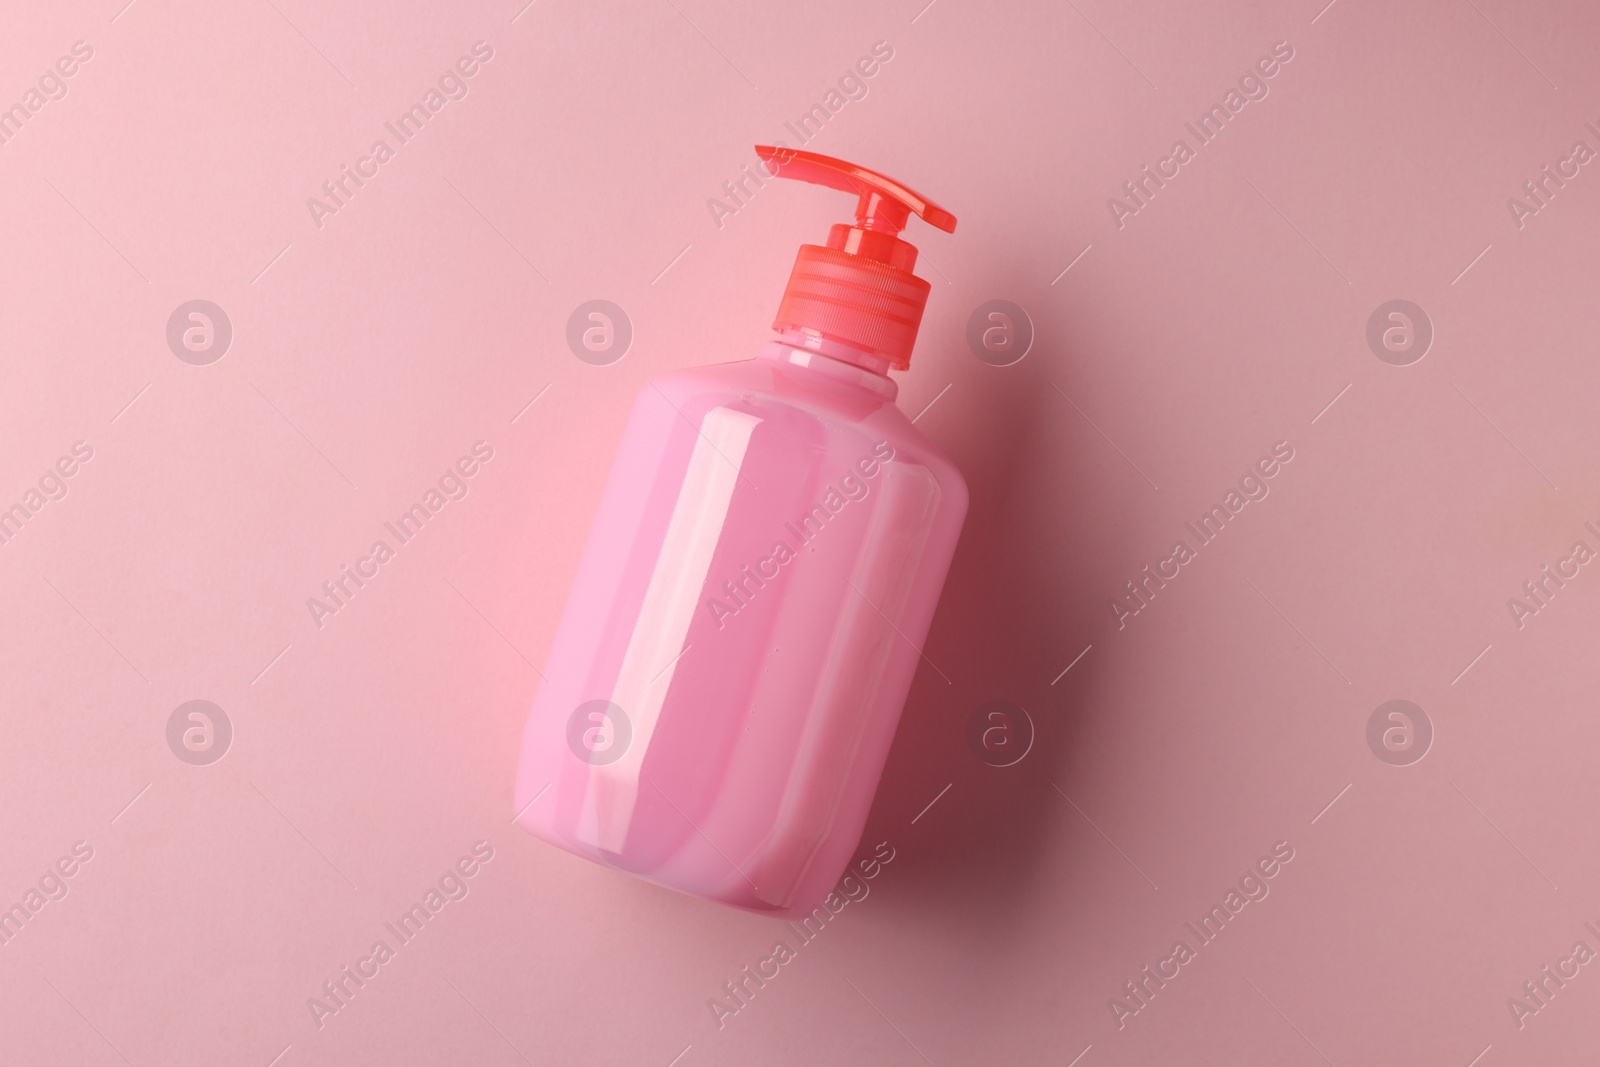 Photo of Bottle of liquid soap on pink background, top view